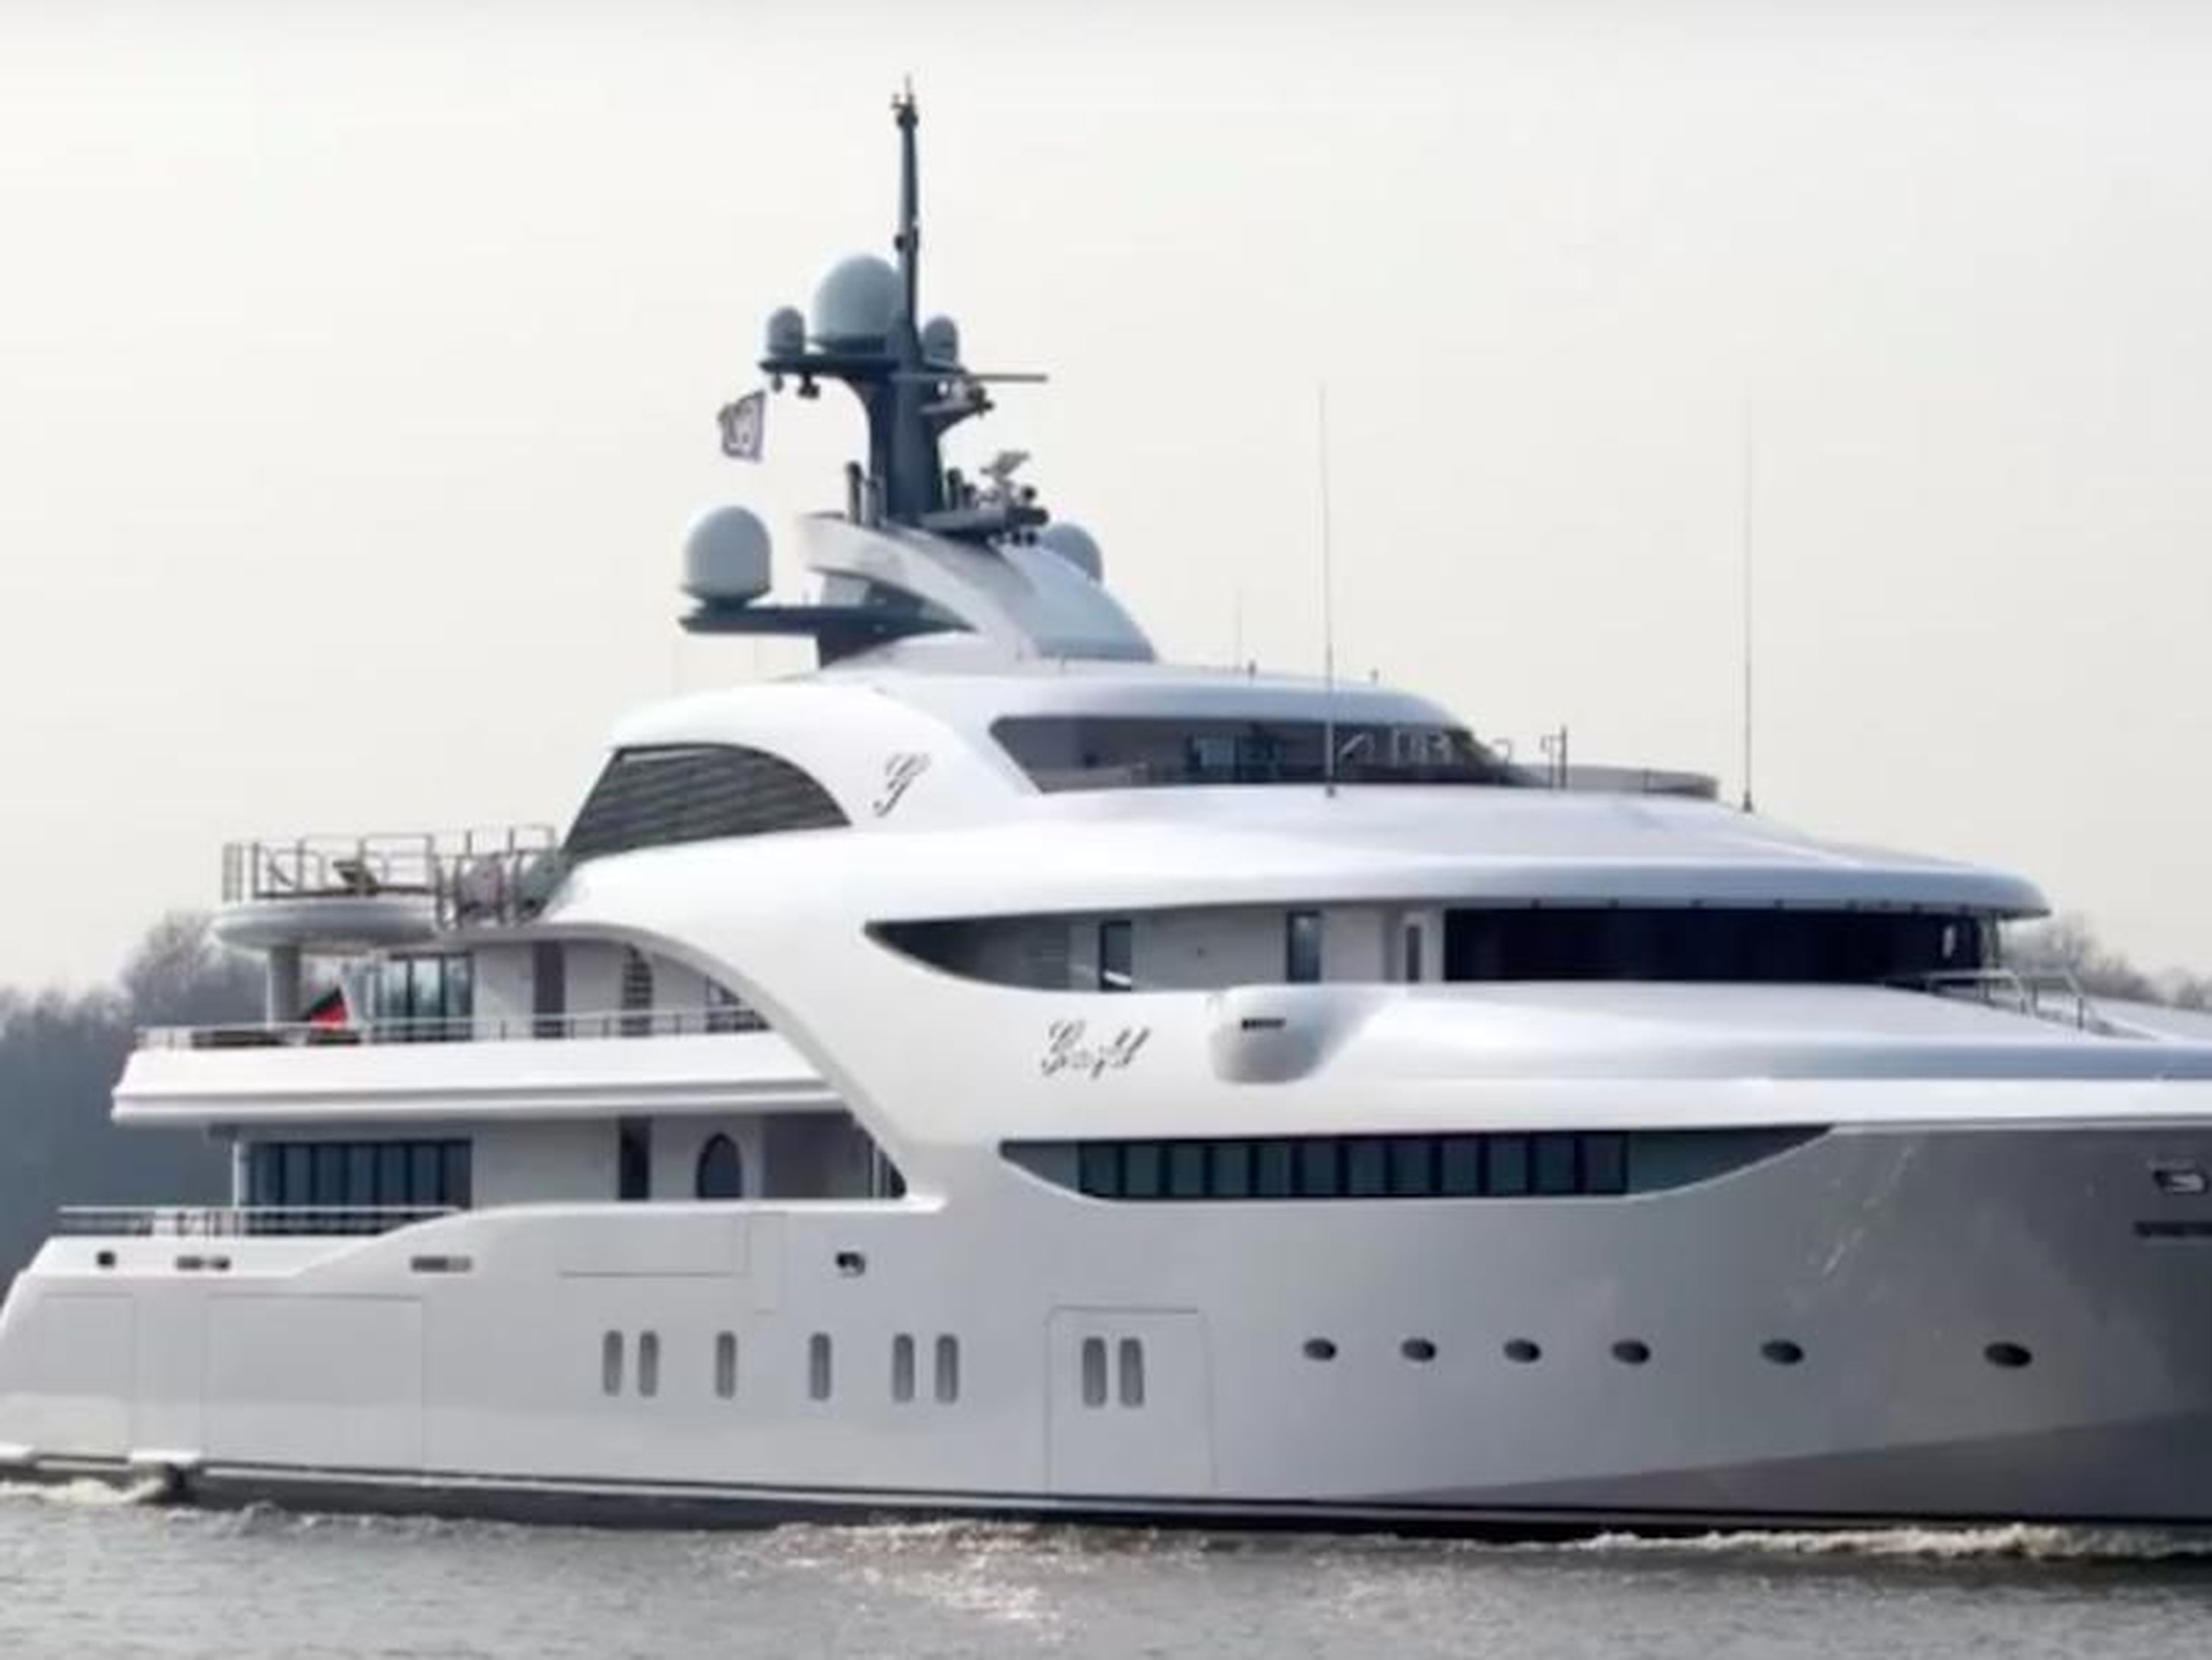 The dossier claimed Putin has a collection of four yachts, each costing thousands of dollars to maintain. Rossiya, one of his yachts, was upgraded in 2005. It reportedly cost $1.2 billion to do. "The Graceful," another of his